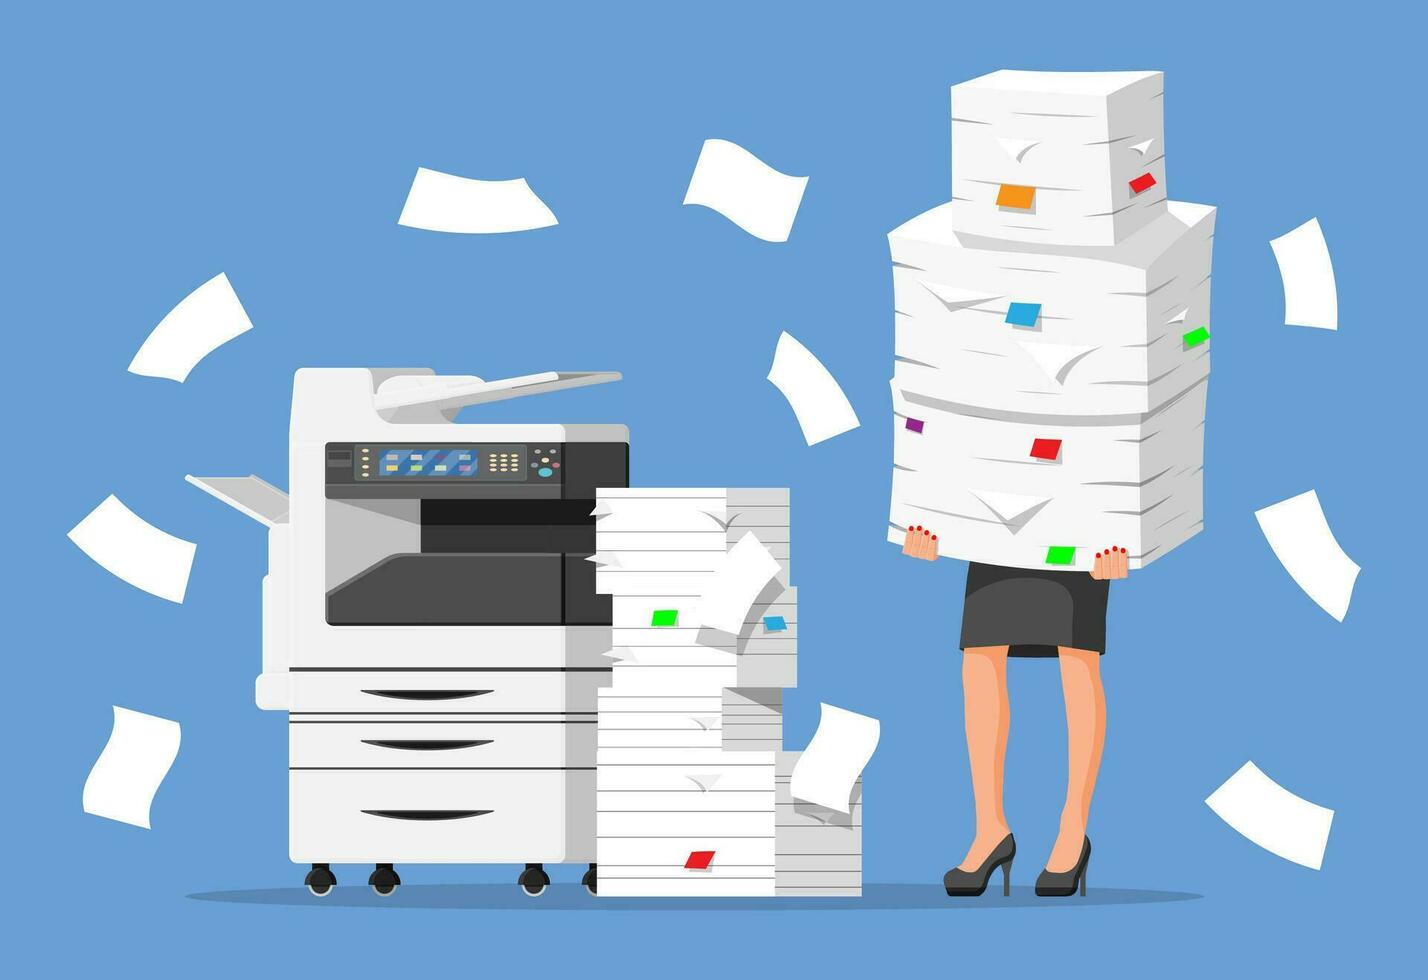 Stressed businesswoman holds pile of office documents. Overworked business woman with stacks of papers. Stress at work. Bureaucracy, paperwork, big data. Vector illustration in flat style